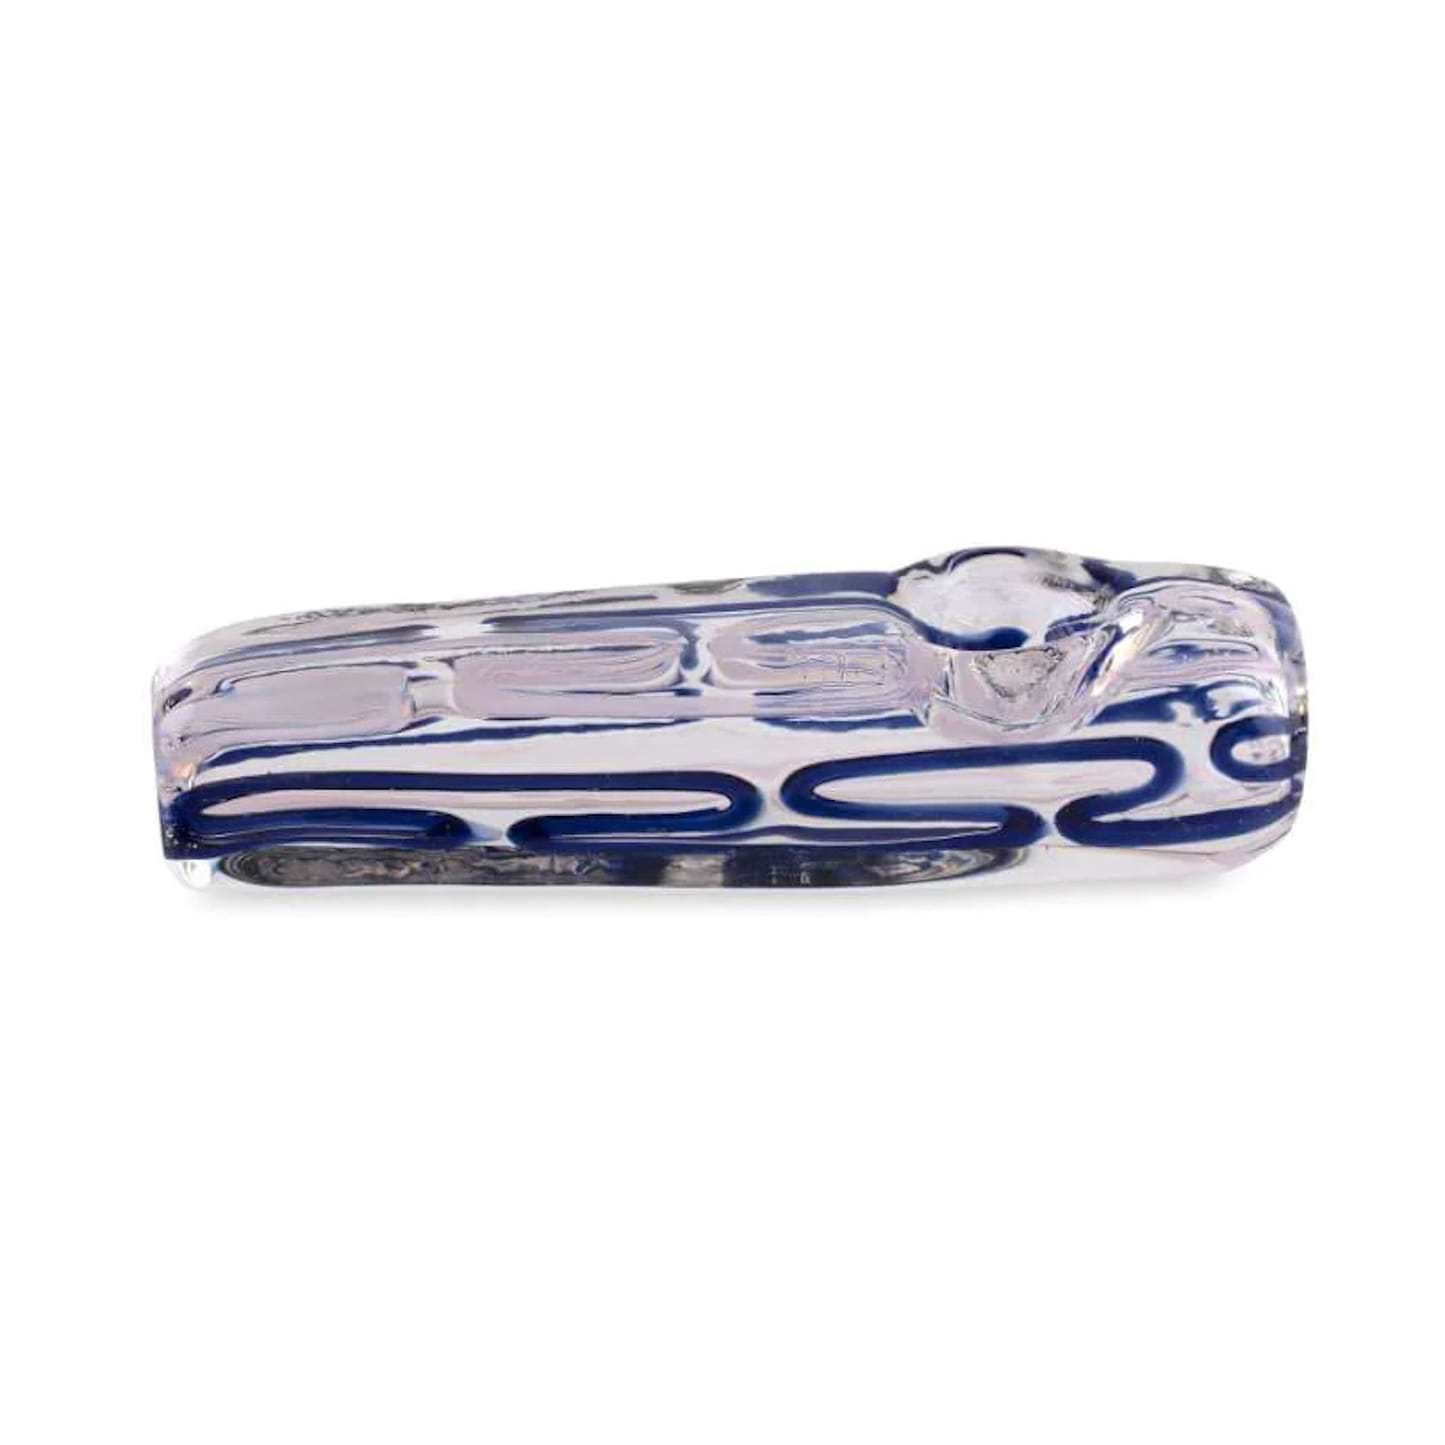 Solid Striped One Hitter - 4in